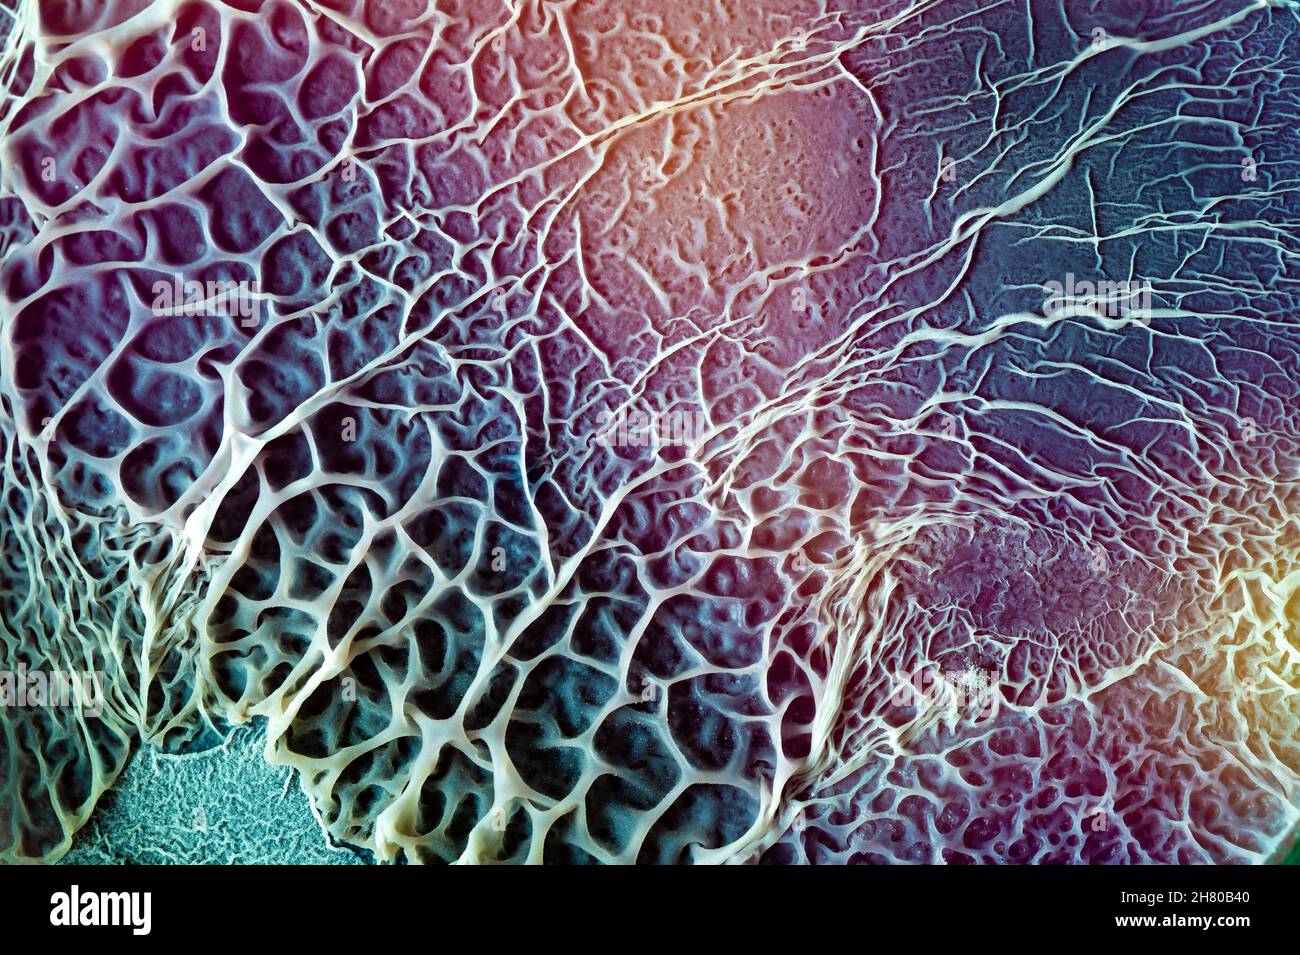 The texture of the bacterial film biofilm on a nutrient medium in a petri dish Stock Photo